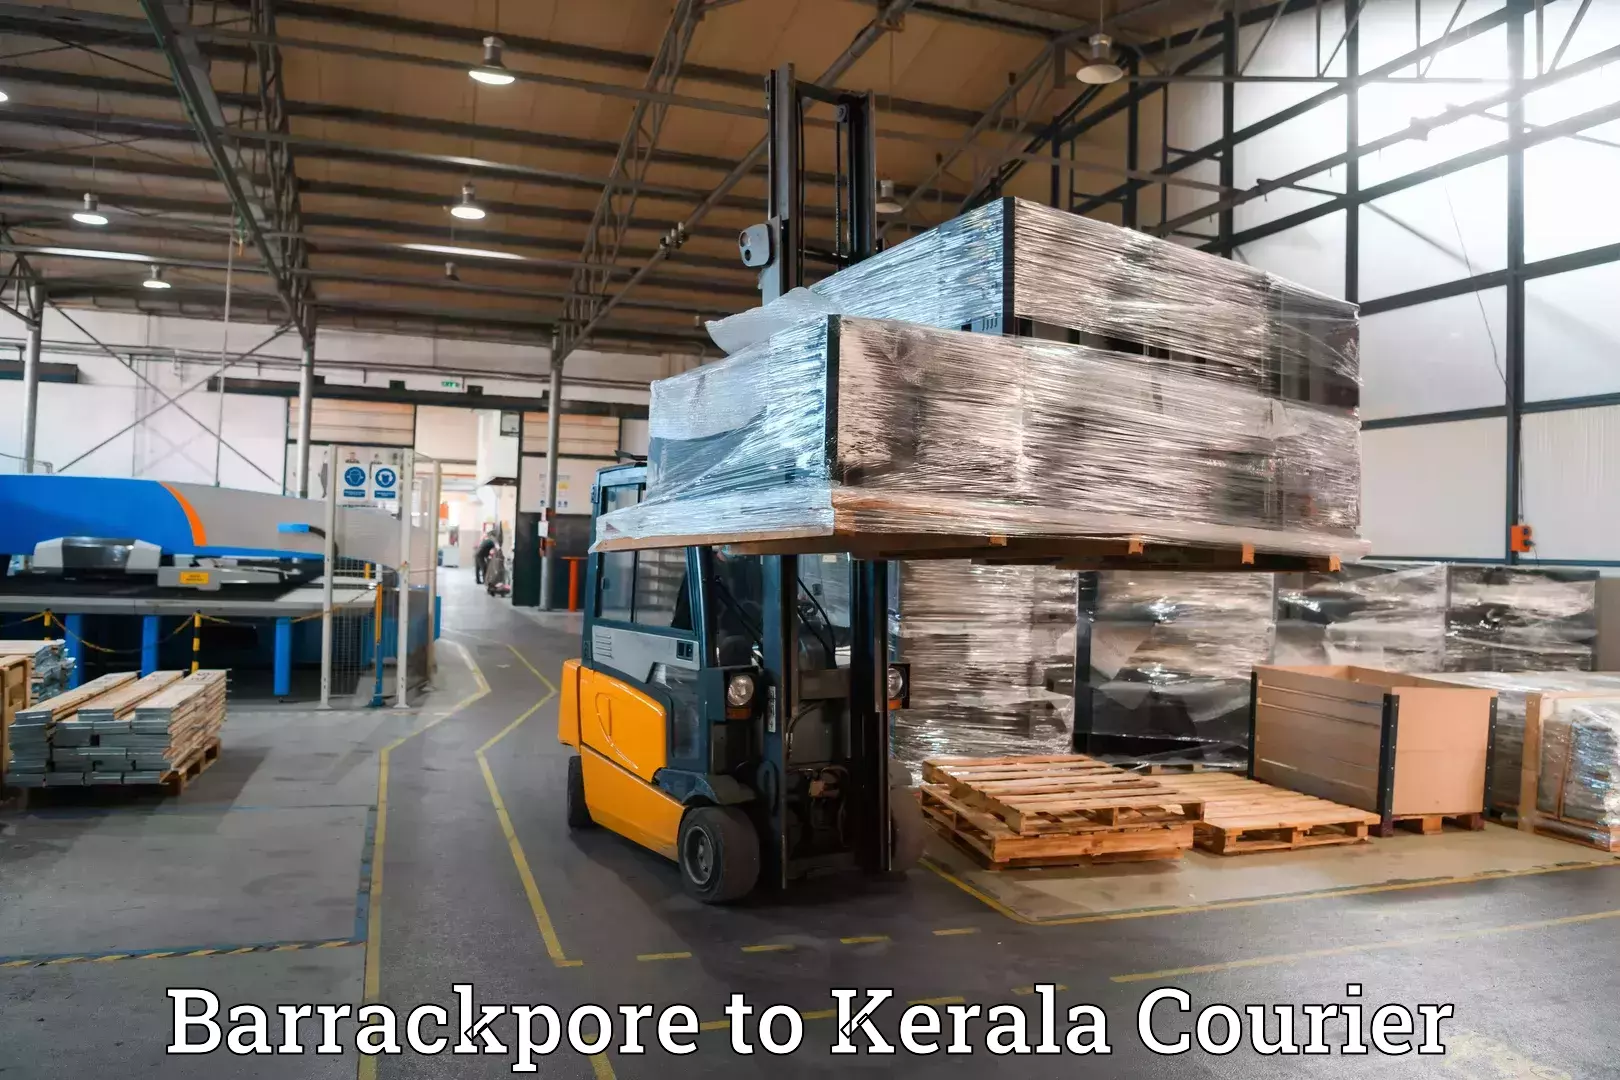 Baggage relocation service Barrackpore to Kerala